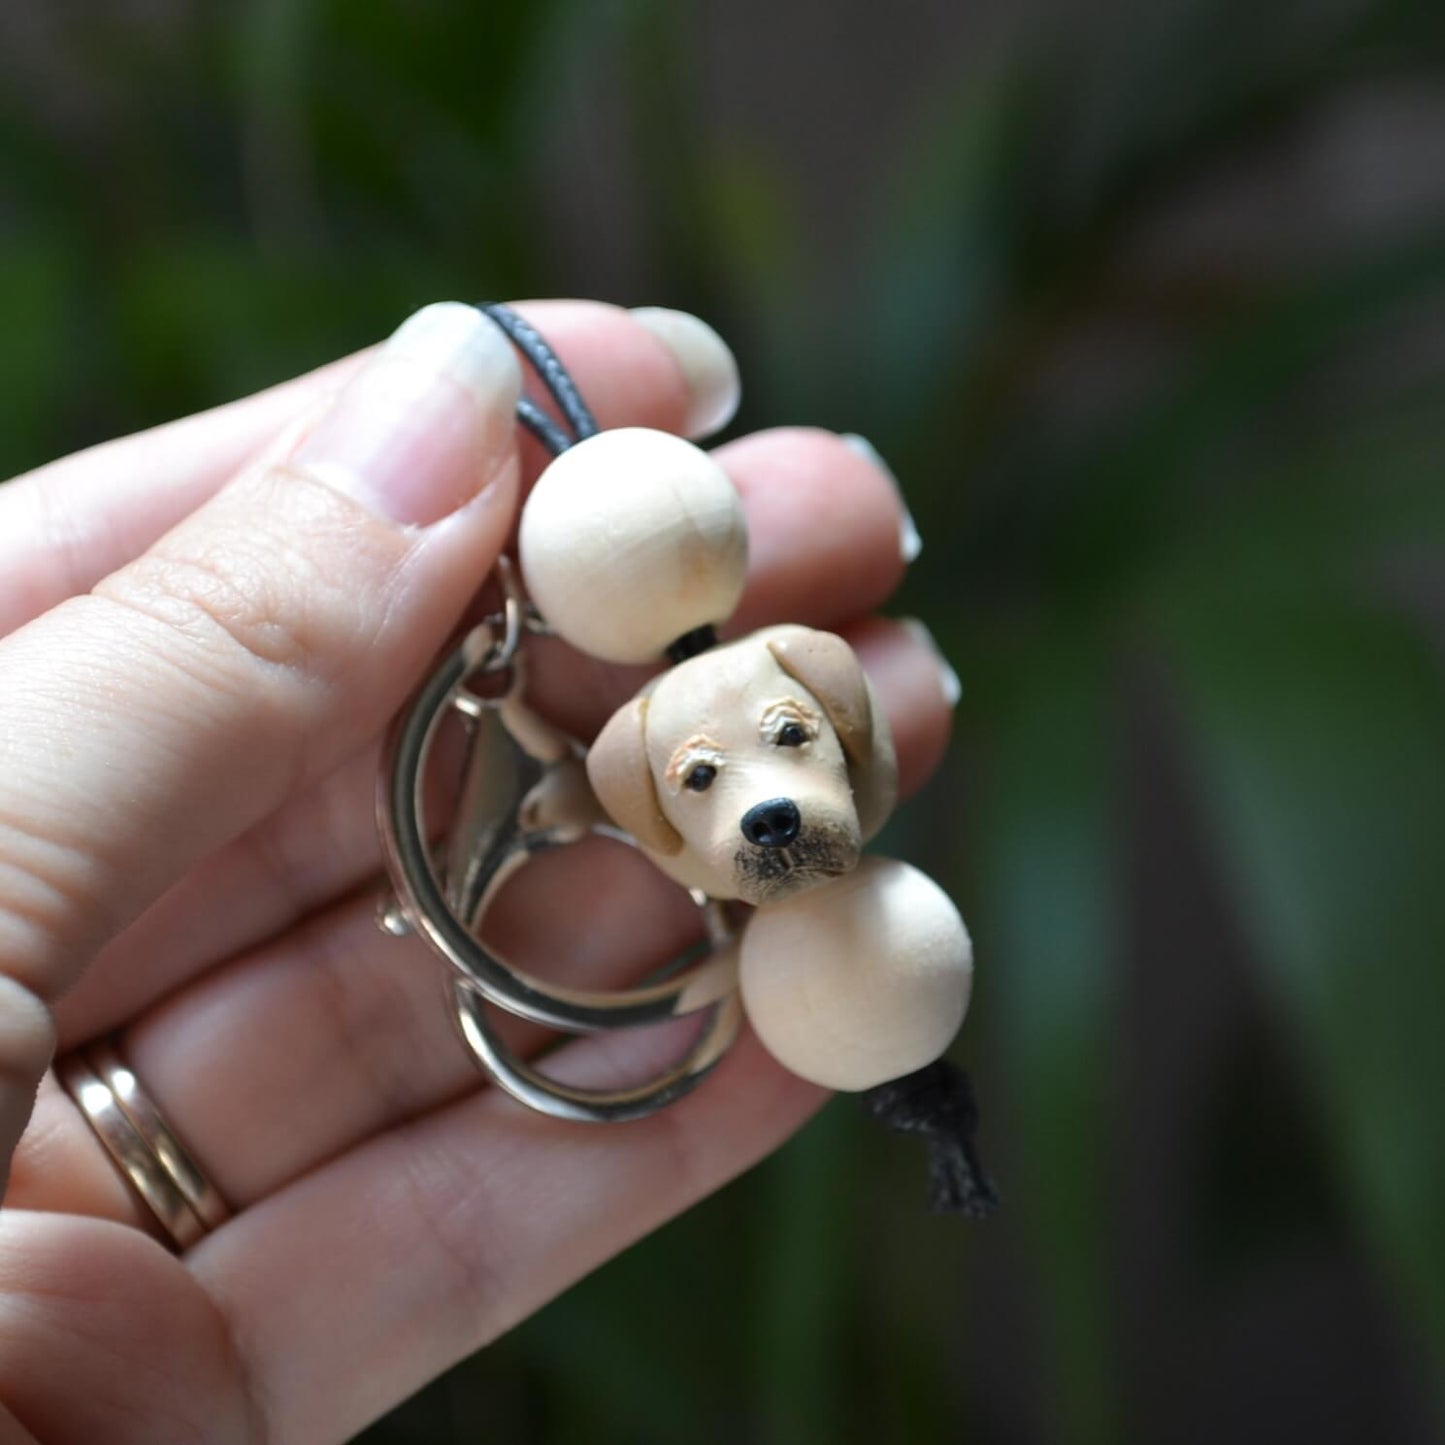 Handmade timber and polymer clay golden retriever dog keychain being held in front of green palm plant background